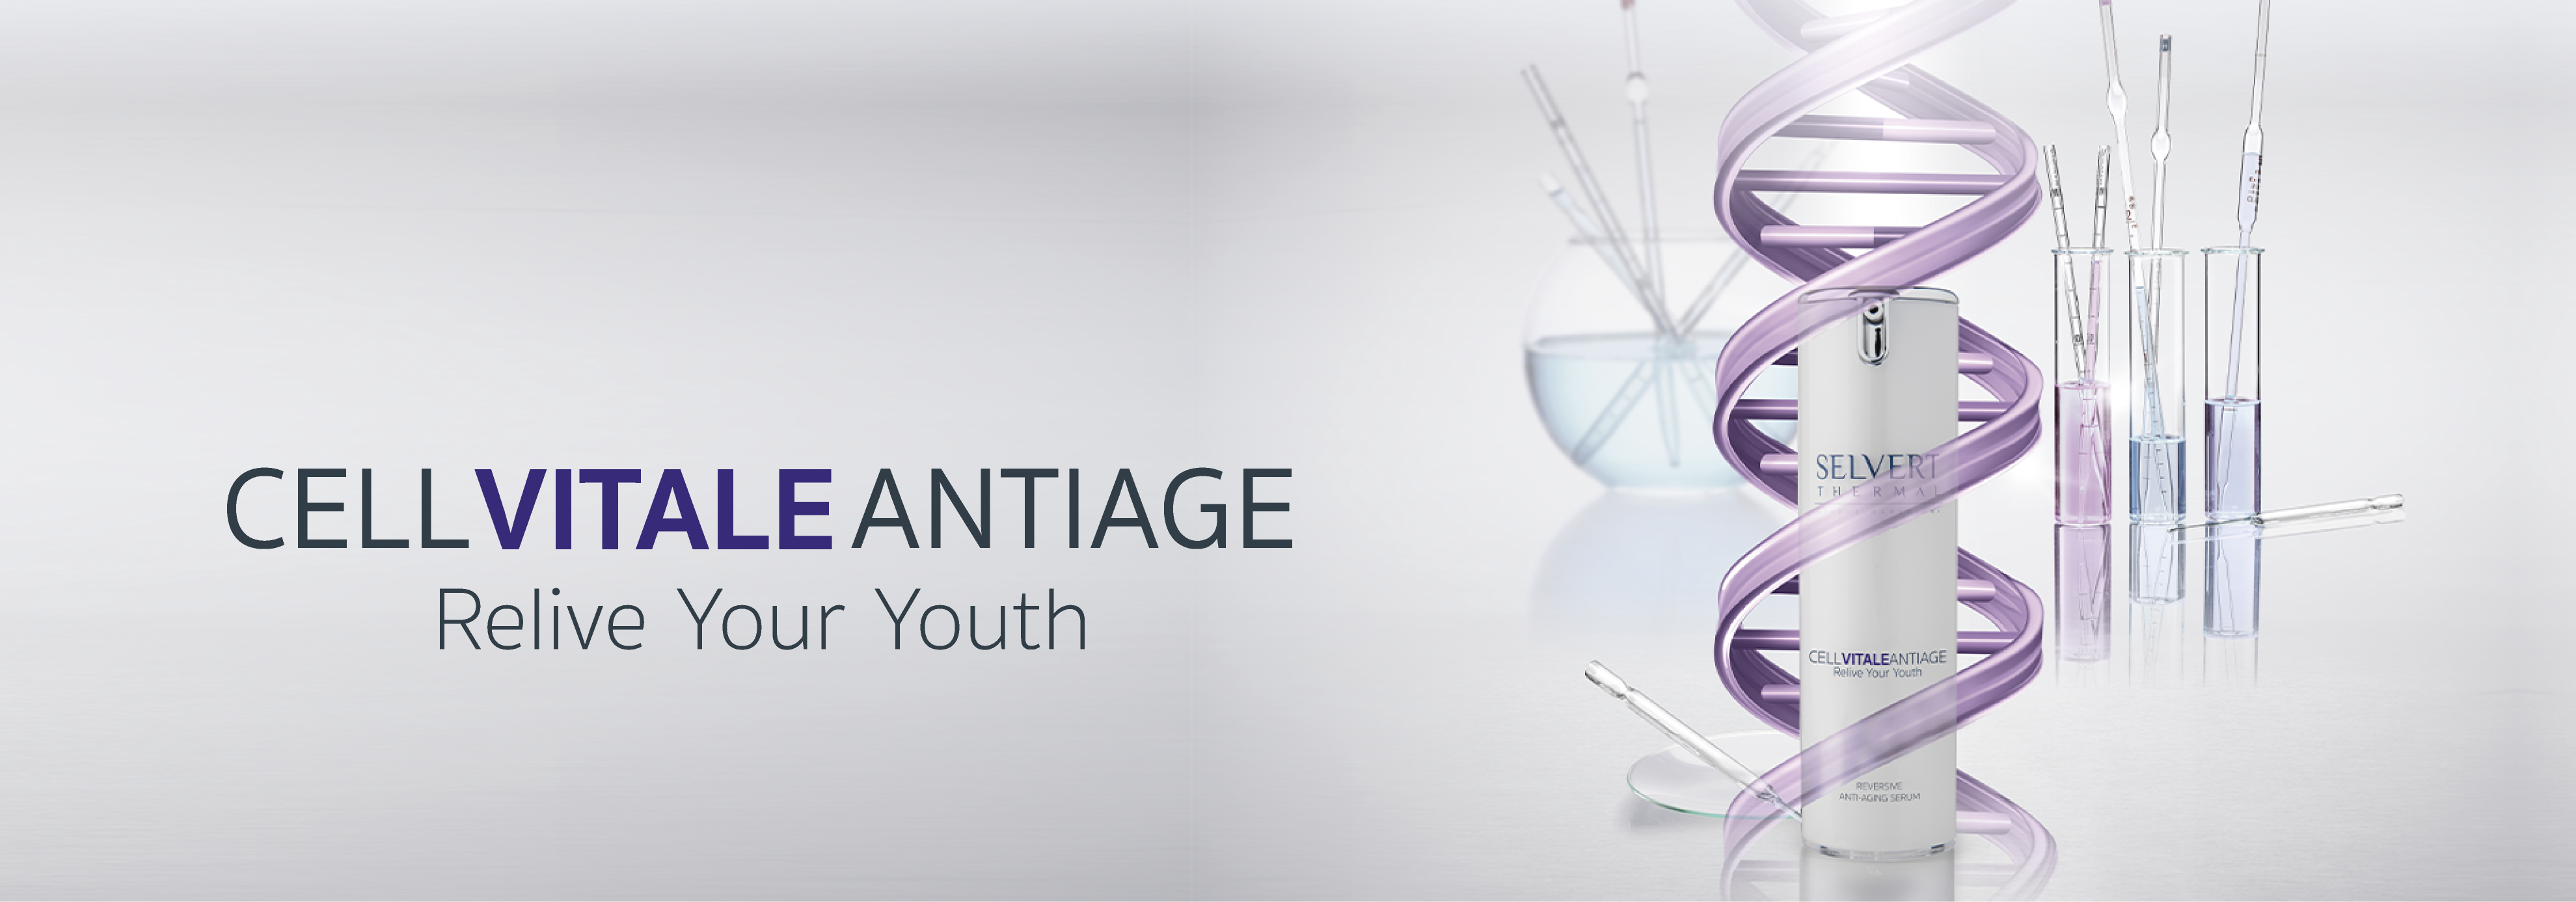 CELL VITALE ANTI-ÂGE <h4 style="text-align: center;">A SOURCE OF YOUTH FOR THE SKIN</h4>
<p>&nbsp;</p>
<p style="text-align: justify;">SELVERT THERMAL introduces CELL VITALE ANTI-AGE; a science based anti-ageing treatment formulated with plant stem cells derived from the Uttwiler Sp&auml;tlauber, a Swiss strain of apple that was grown as far back as the 18th Century, which helps to slow down the ageing process, stimulates cell regeneration and gives the skin back its youthful appearance.</p>
<p style="text-align: justify;">Stem cells play a key role in the maintenance of youthful skin due to their intense regenerating power. They are adversely affected by the passage of time and exposure to environmental aggressions, which cause skin stem cell activity to slow down and thereby contribute to the loss of skin firmness, density and moisture. As a result of this process, the signs of skin ageing begin to appear.</p>
<p style="text-align: justify;">Selvert Thermal has created the Programme Cellulaire Anti-&Acirc;ge (Anti-ageing Cellular Programme) by Cell Vitale. Due to its superb combination of plant stem cells and a highly effective blend of anti-ageing active ingredients, Cell Vitale is the perfect ally to help the face regain its former beauty in all its splendour.</p>